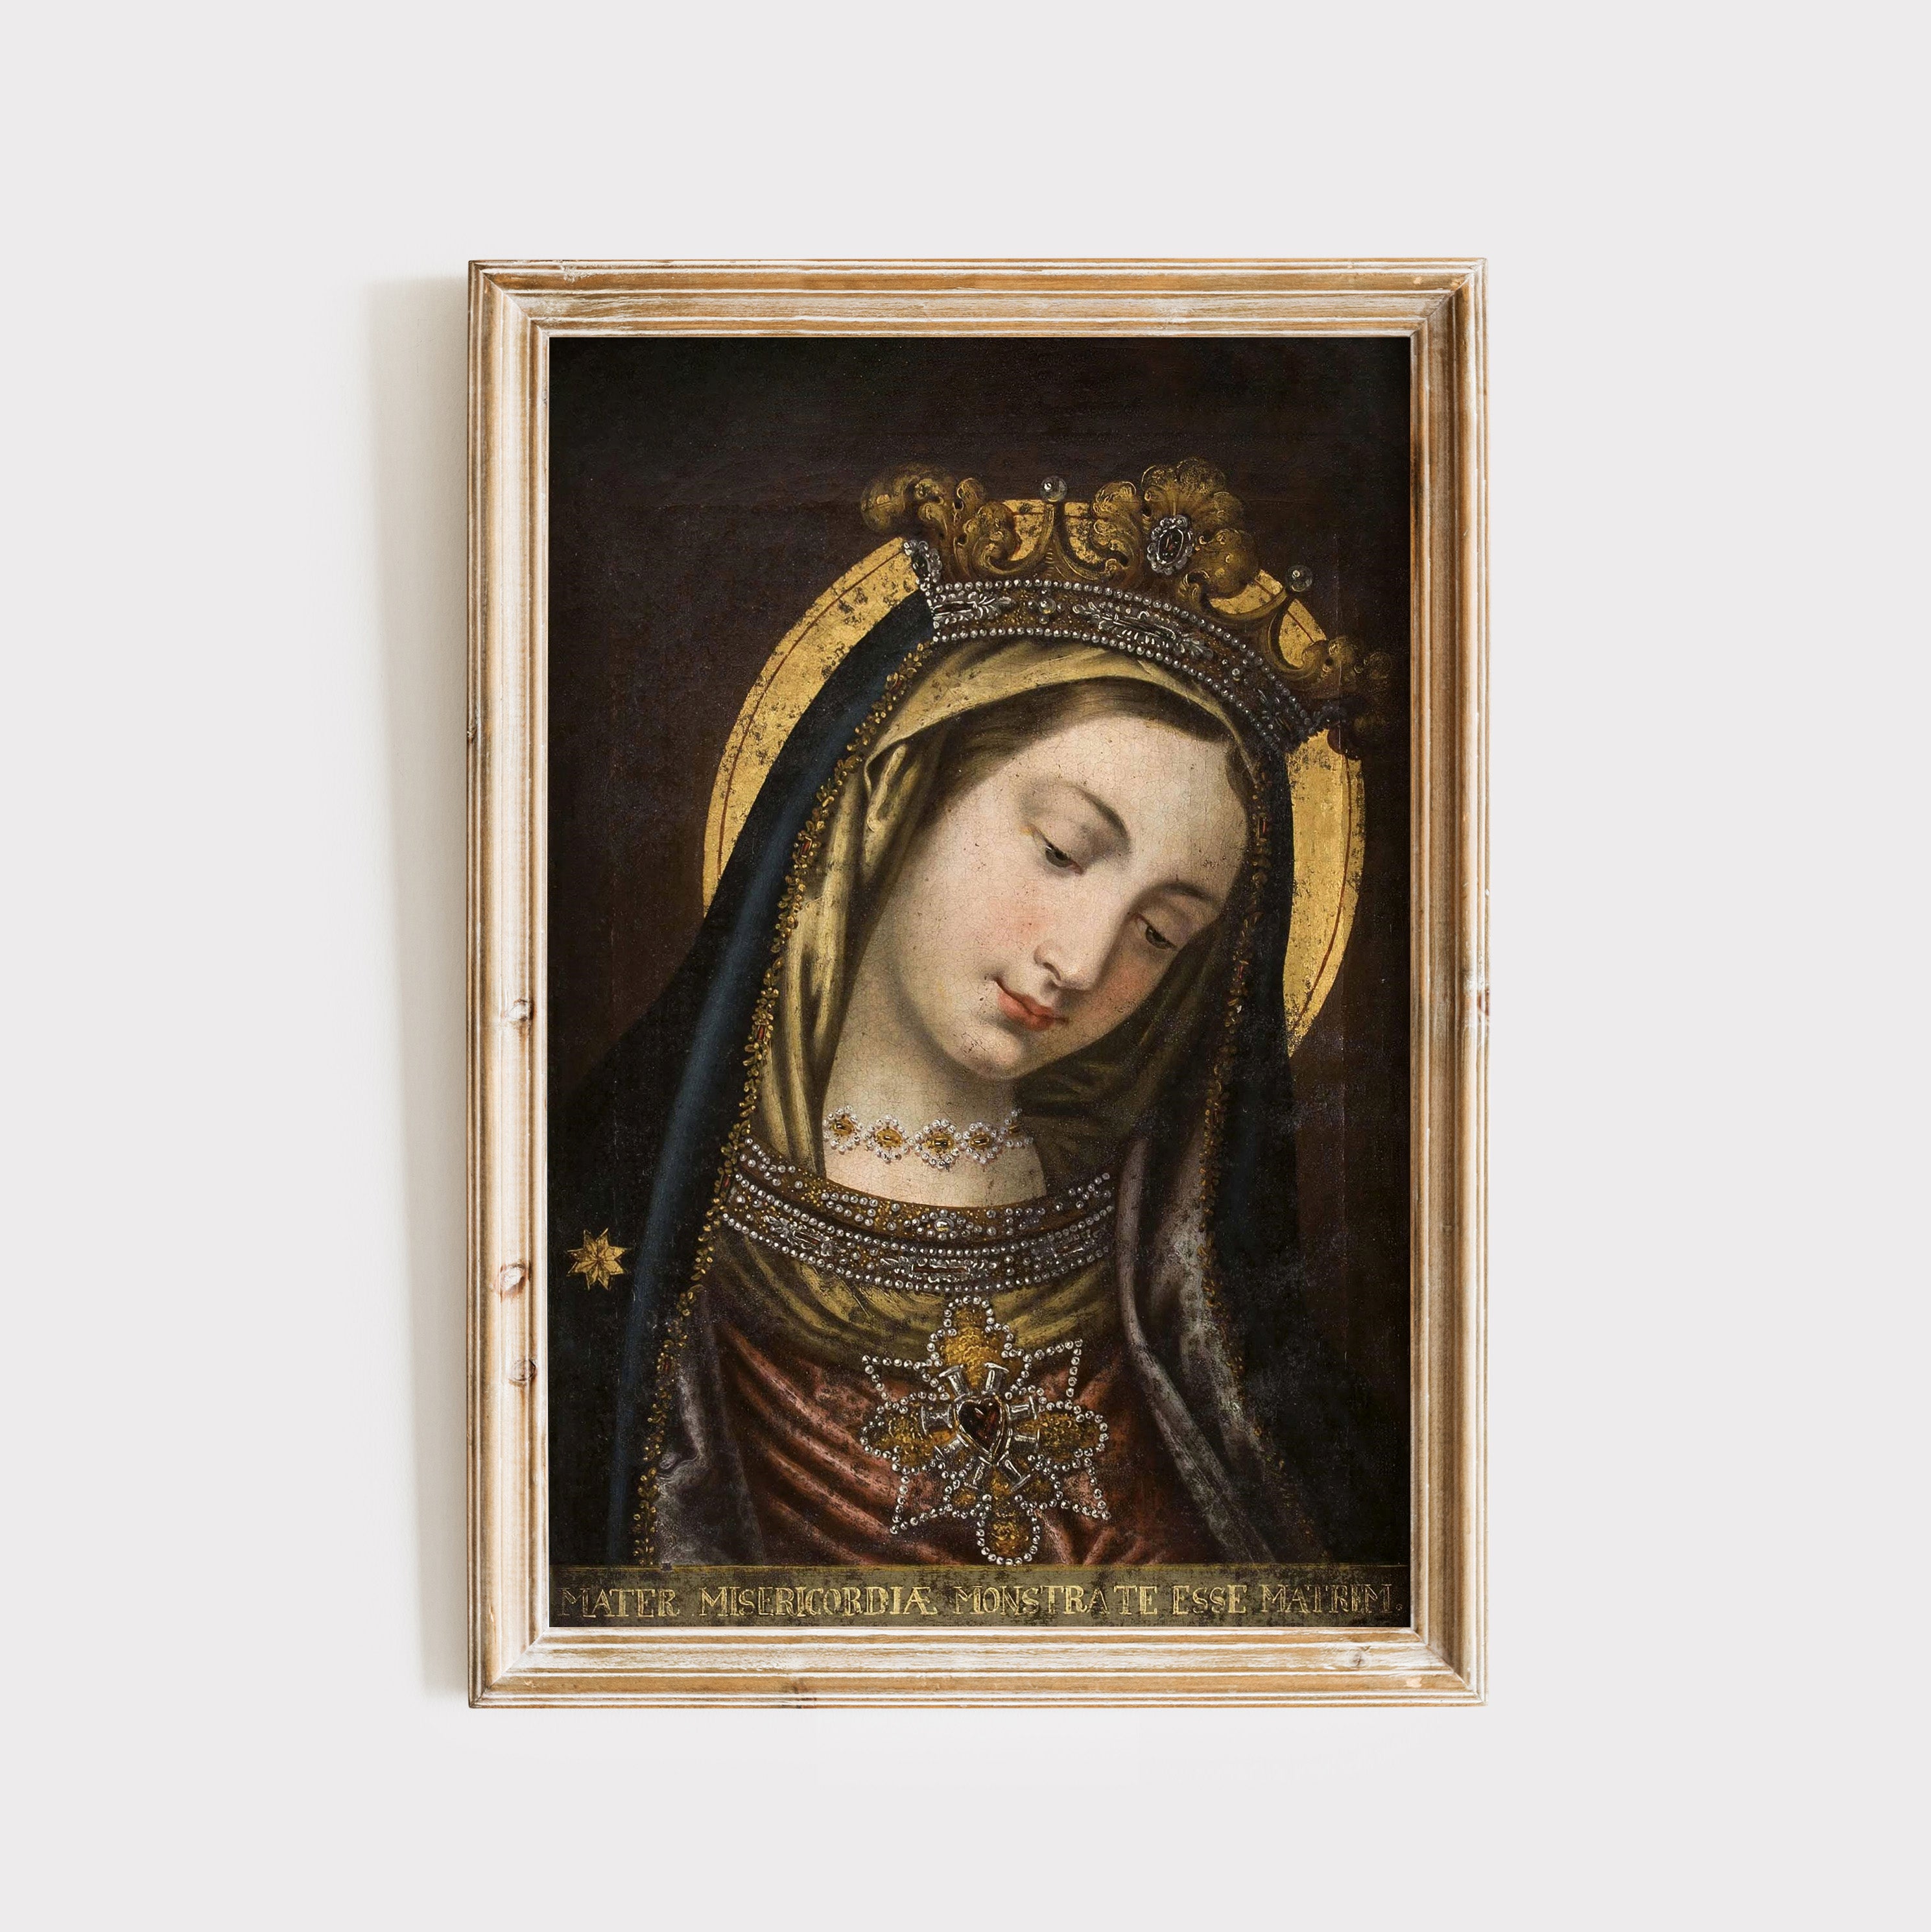 Our Lady of the Bowed Head Art Print (Mater Misericordiae)